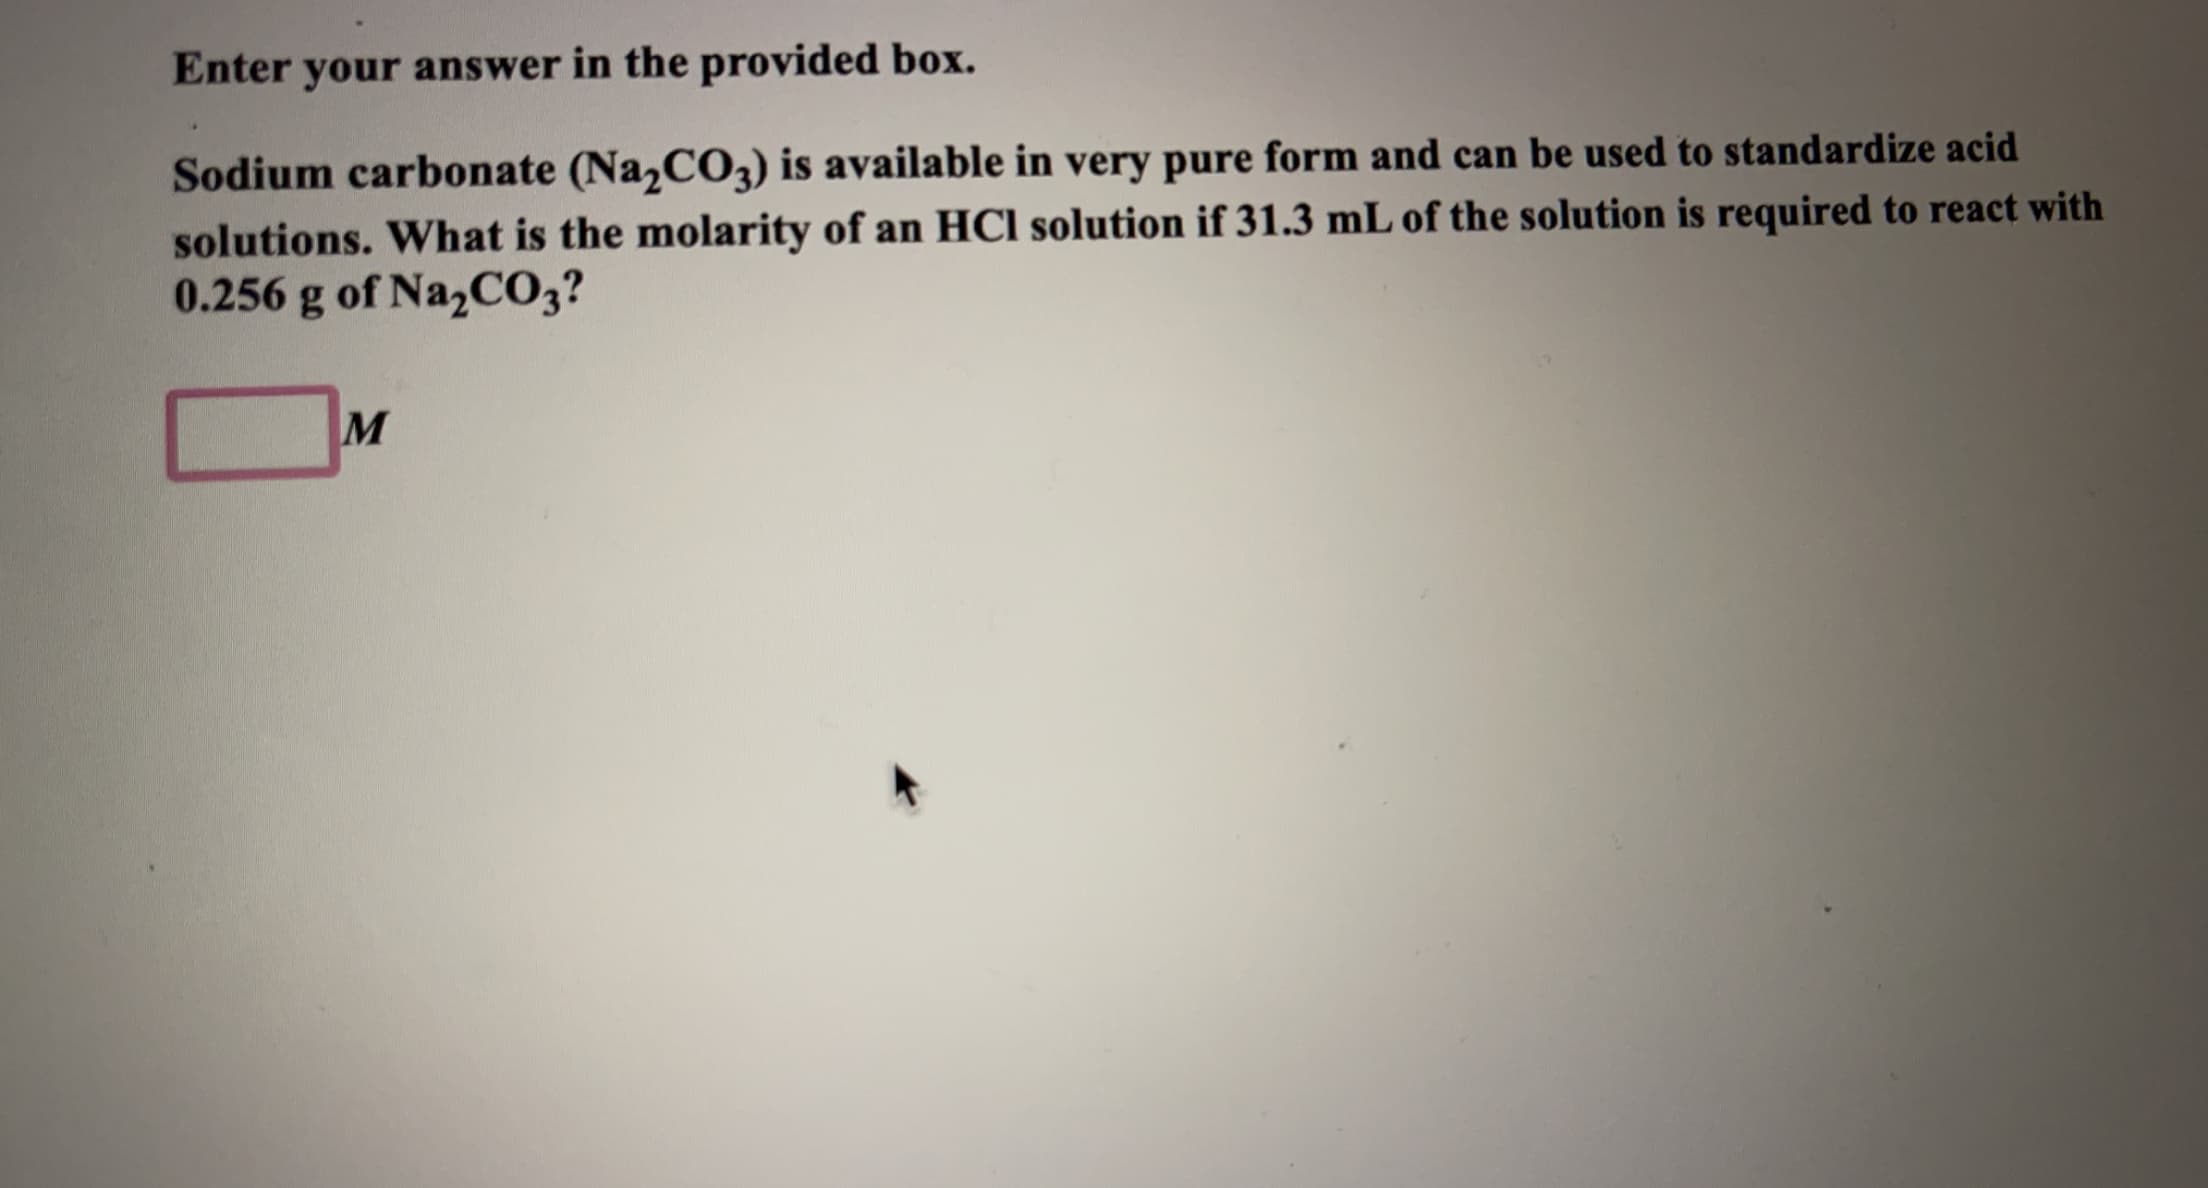 Enter your answer in the provided box.
Sodium carbonate (Na,CO2) is available in very pure form and can be used to standardize acid
solutions. What is the molarity of an HCI solution if 31.3 mL of the solution is required to react with
0.256 g of NazCO3?
